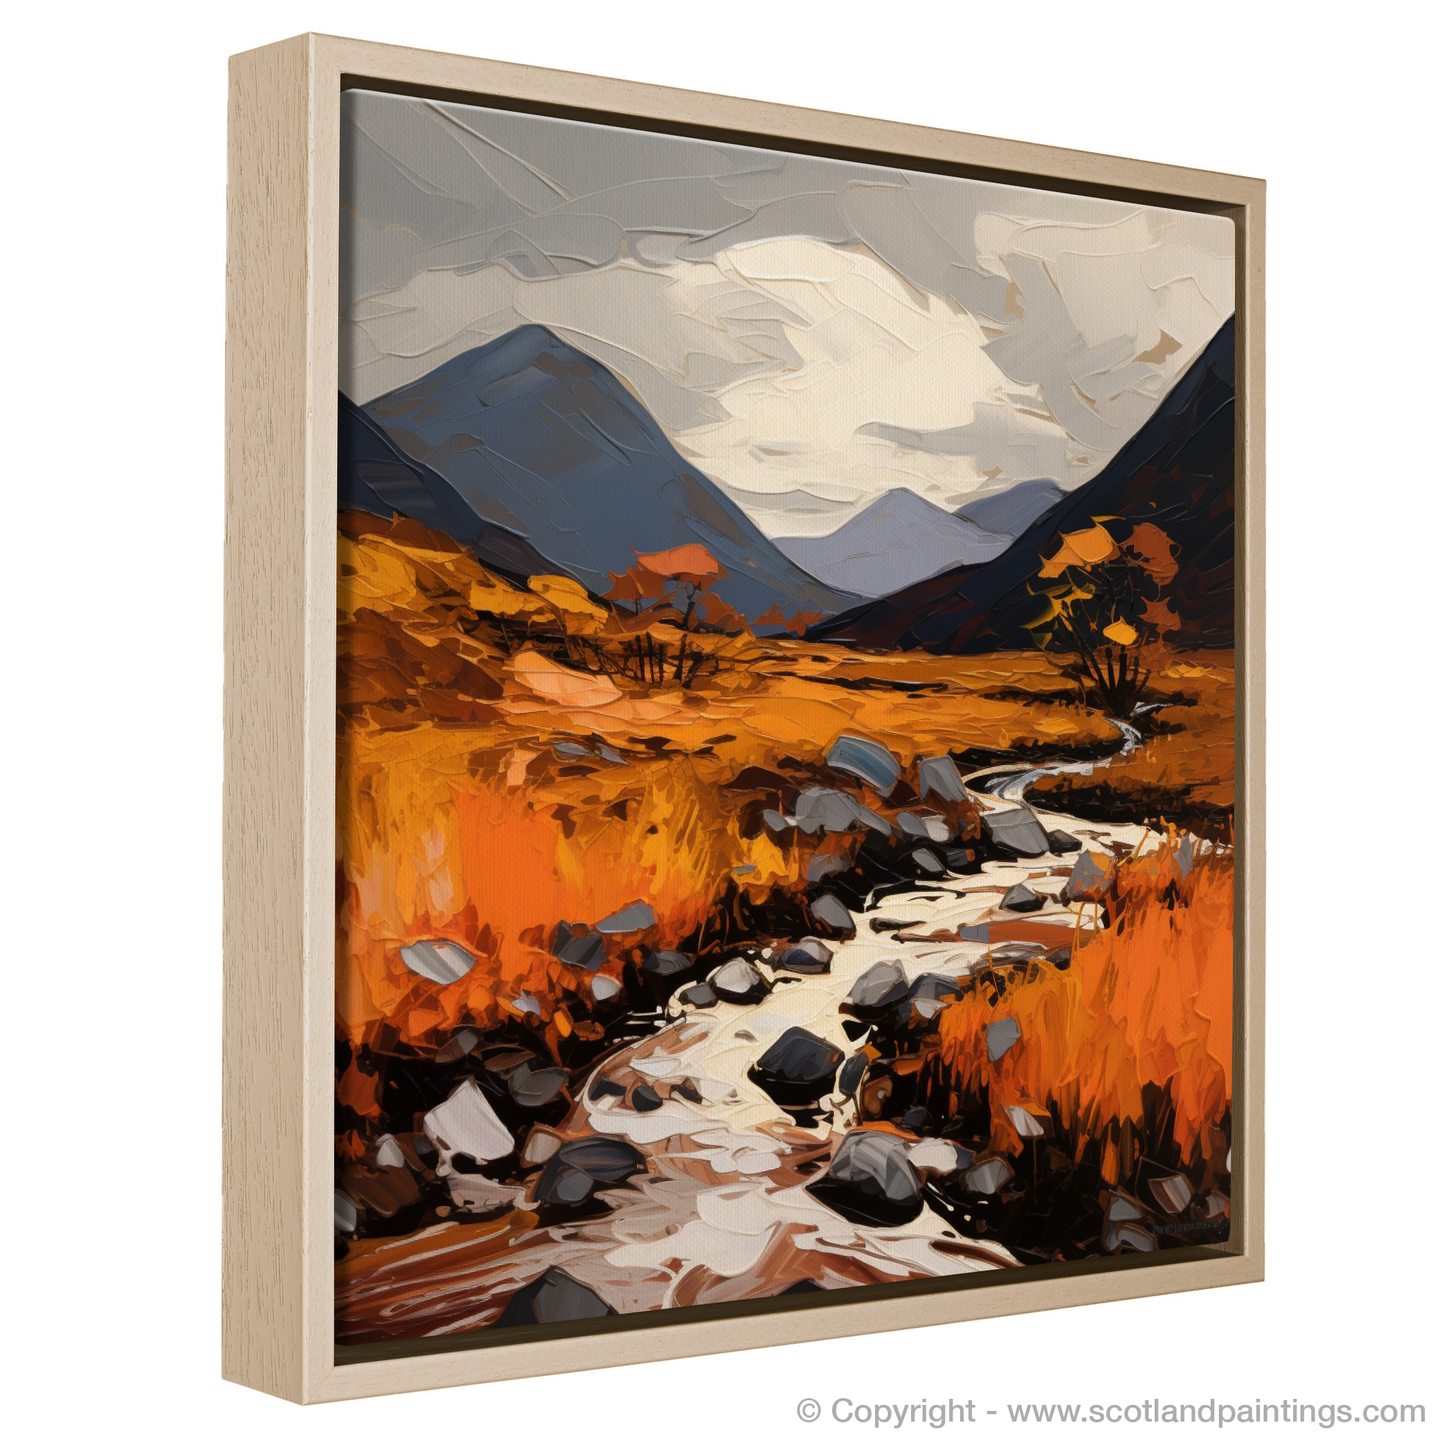 Painting and Art Print of Autumn hues in Glencoe entitled "Autumn Blaze in Glencoe: An Expressionist Odyssey".